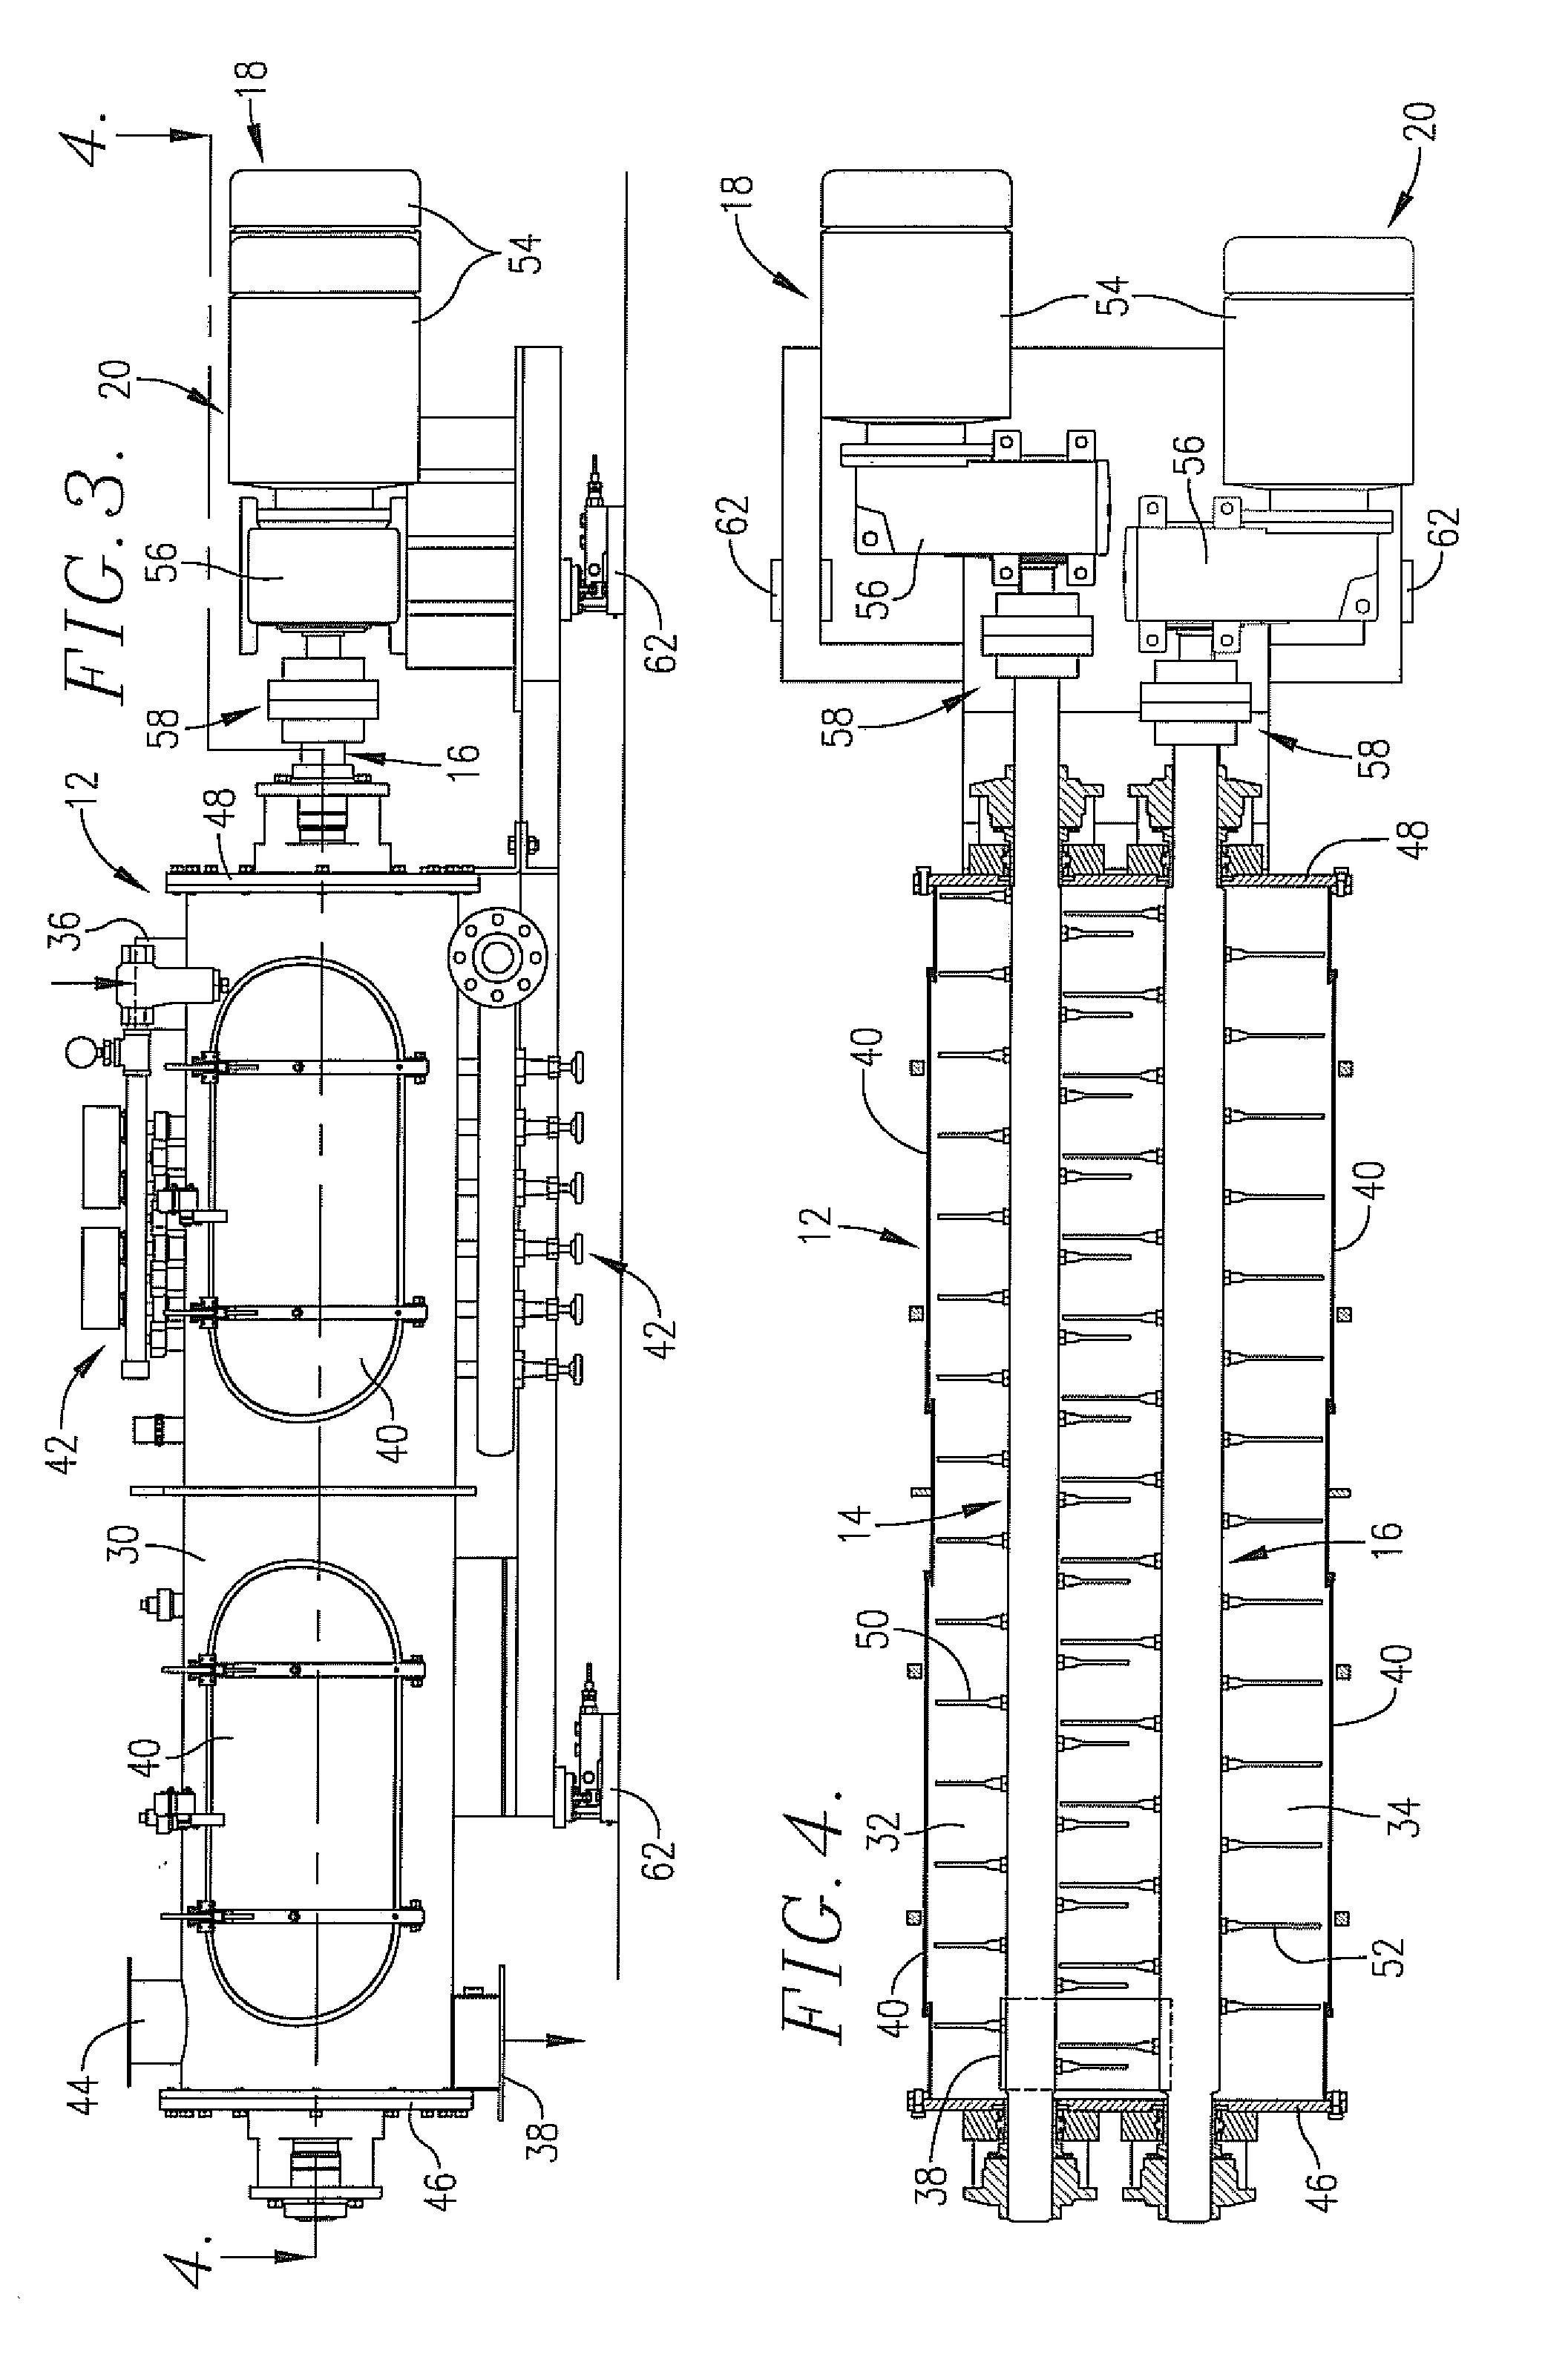 Preconditioner having independently driven high-speed mixer shafts